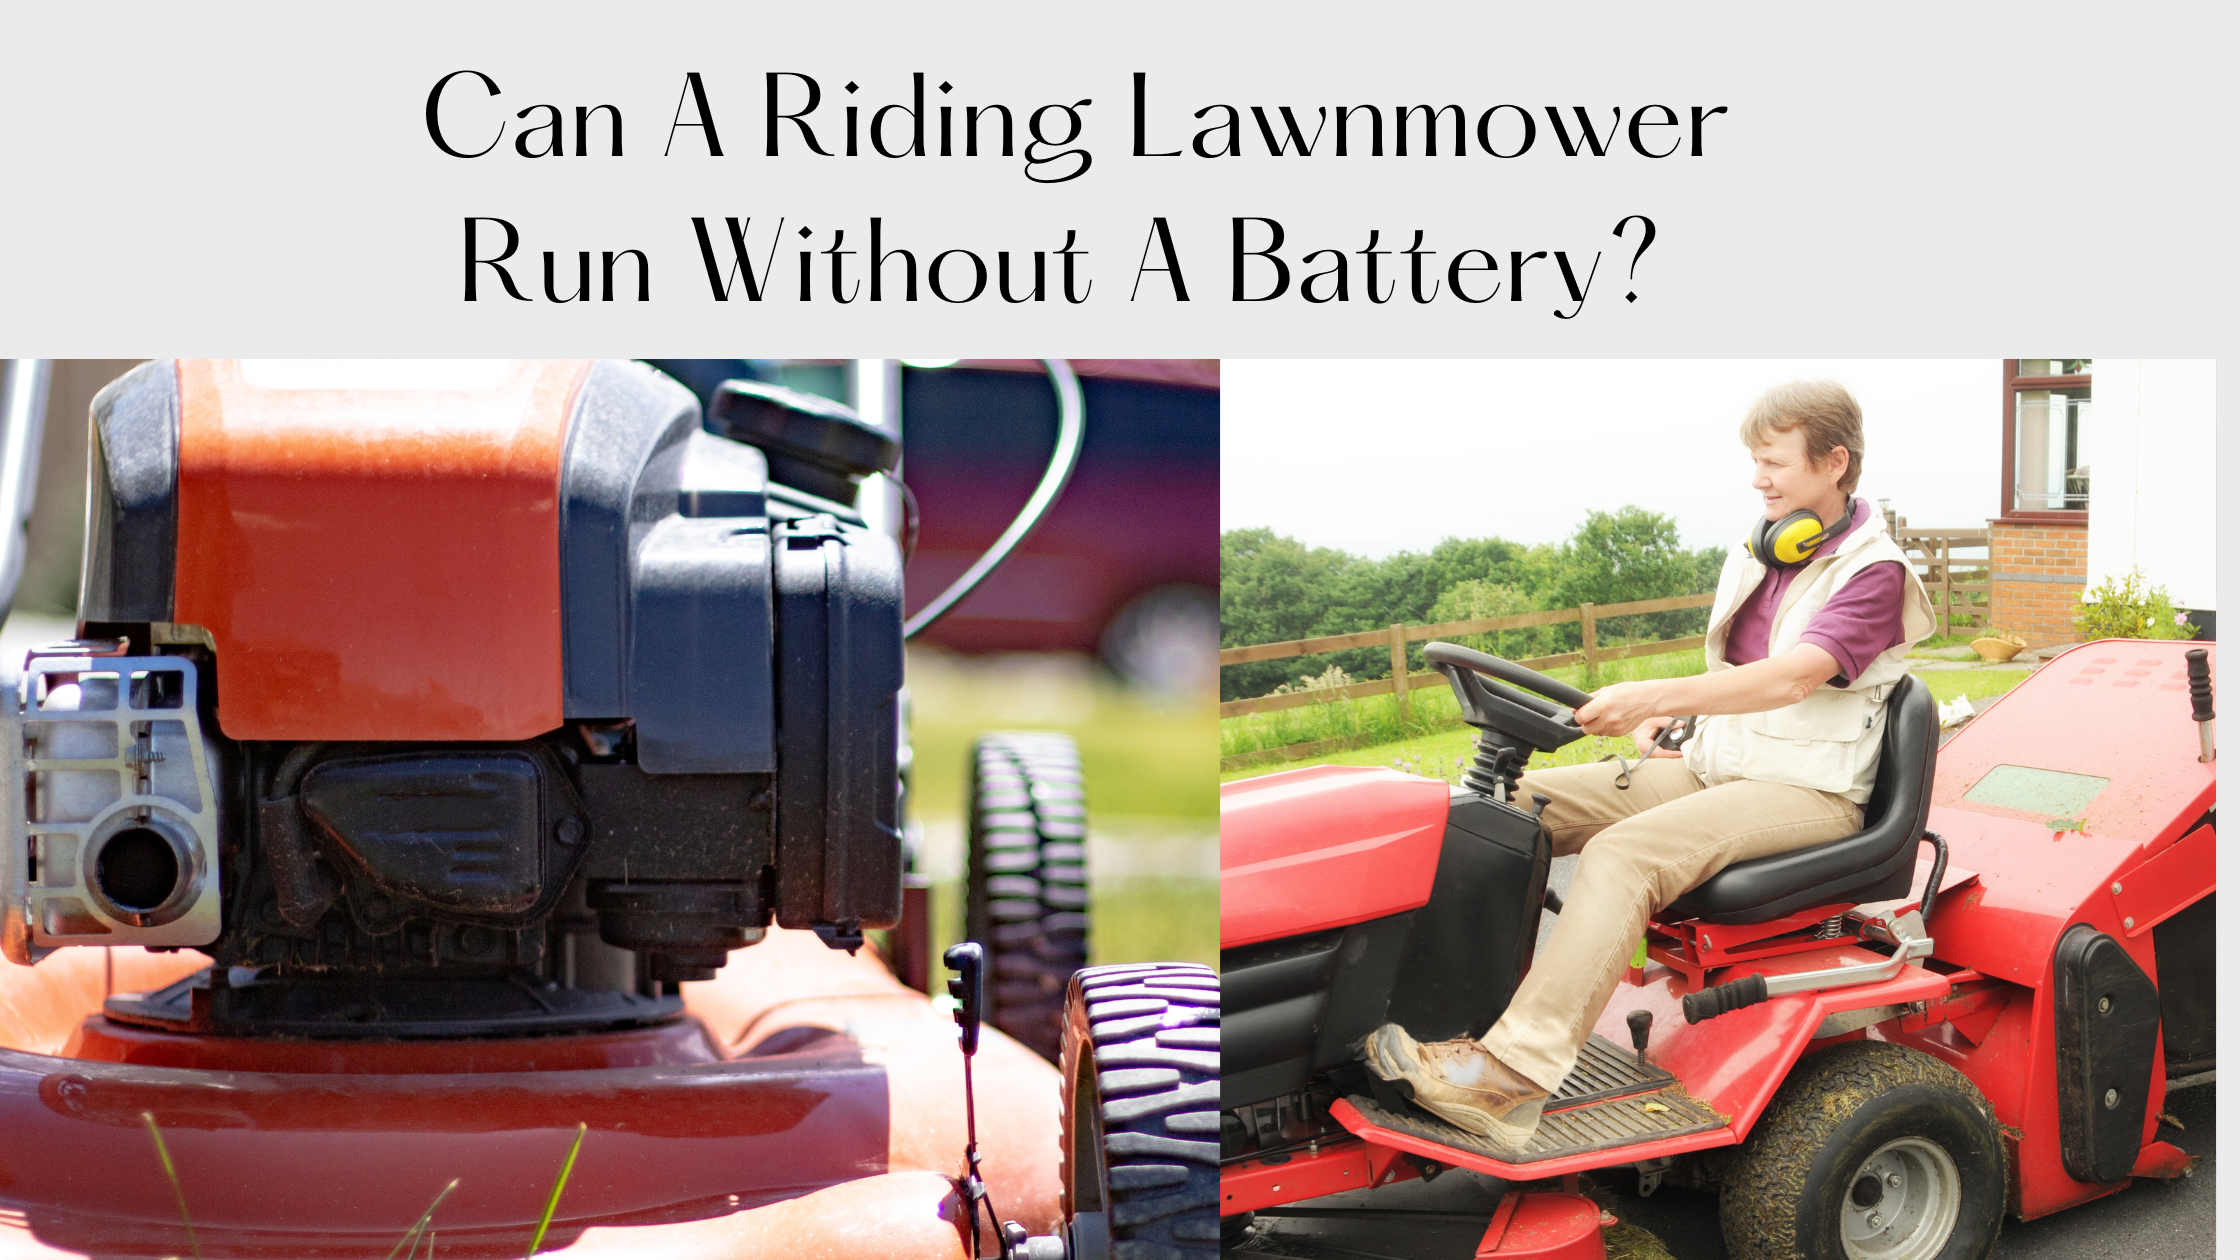 Can A Riding Lawnmower Run Without A Battery